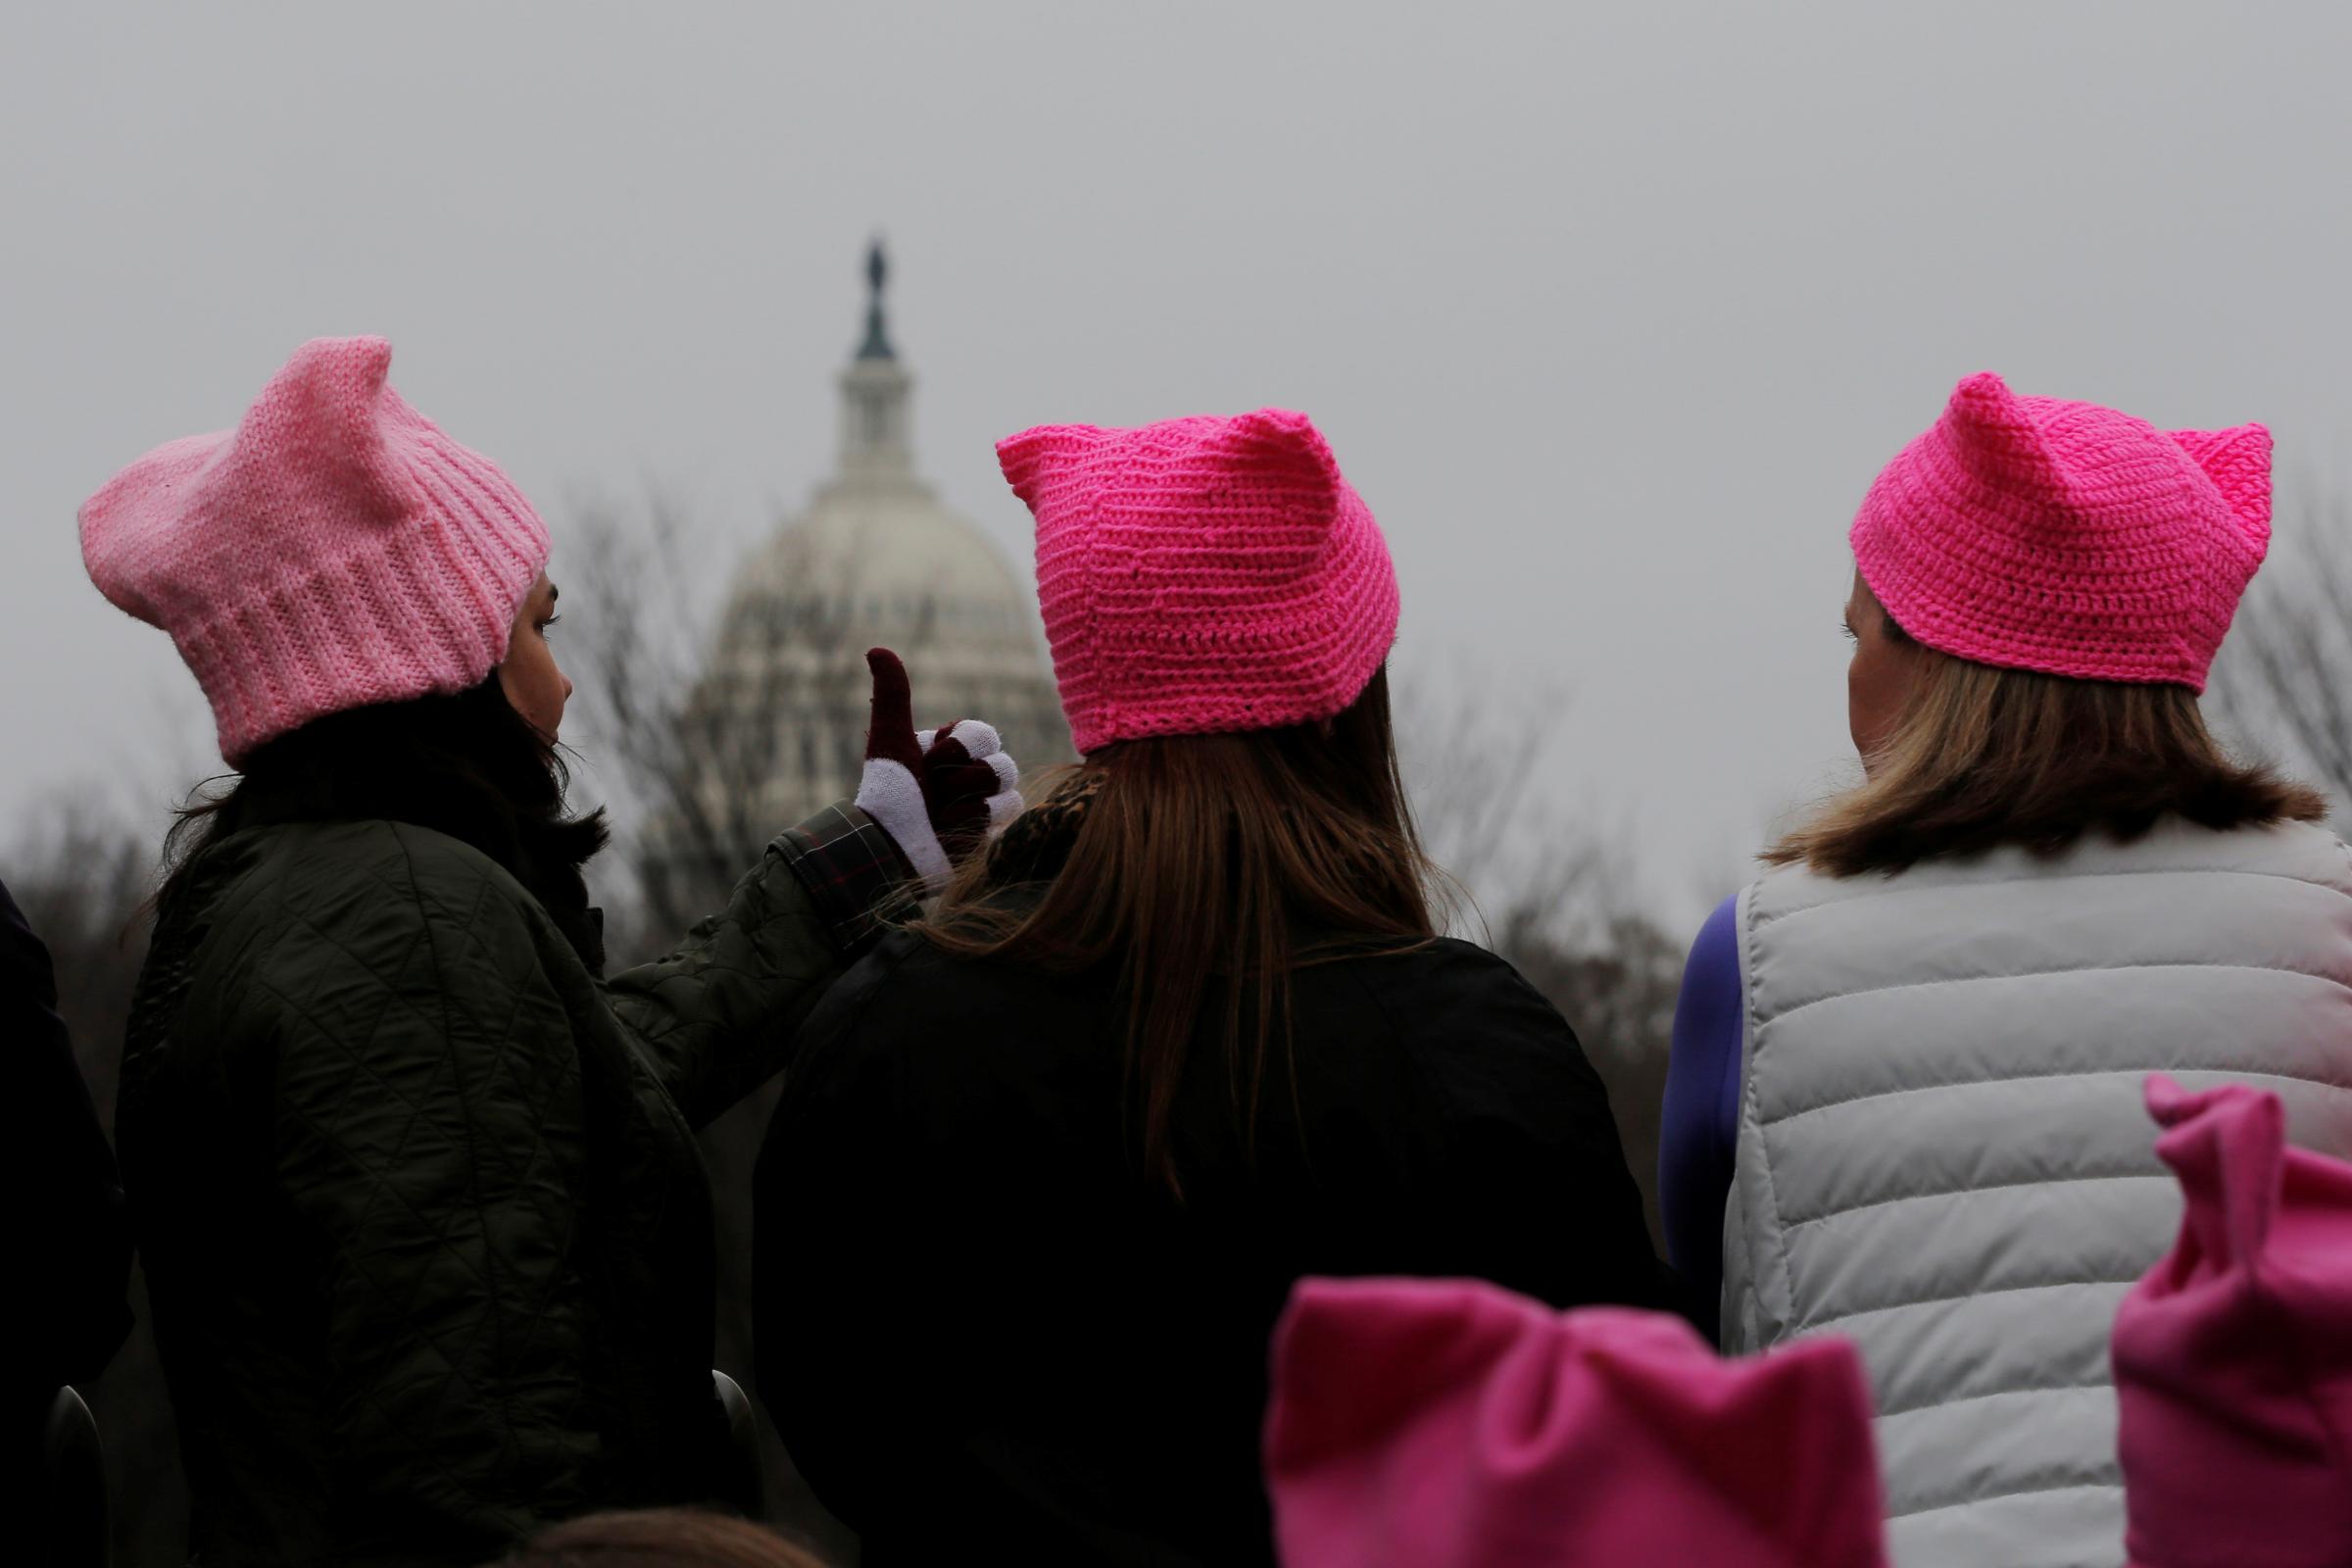 Women wearing pink pussy protest hats gather in front of the U.S. Capitol for the Women's March on Washington, following the inauguration of U.S. President Donald Trump, in Washington